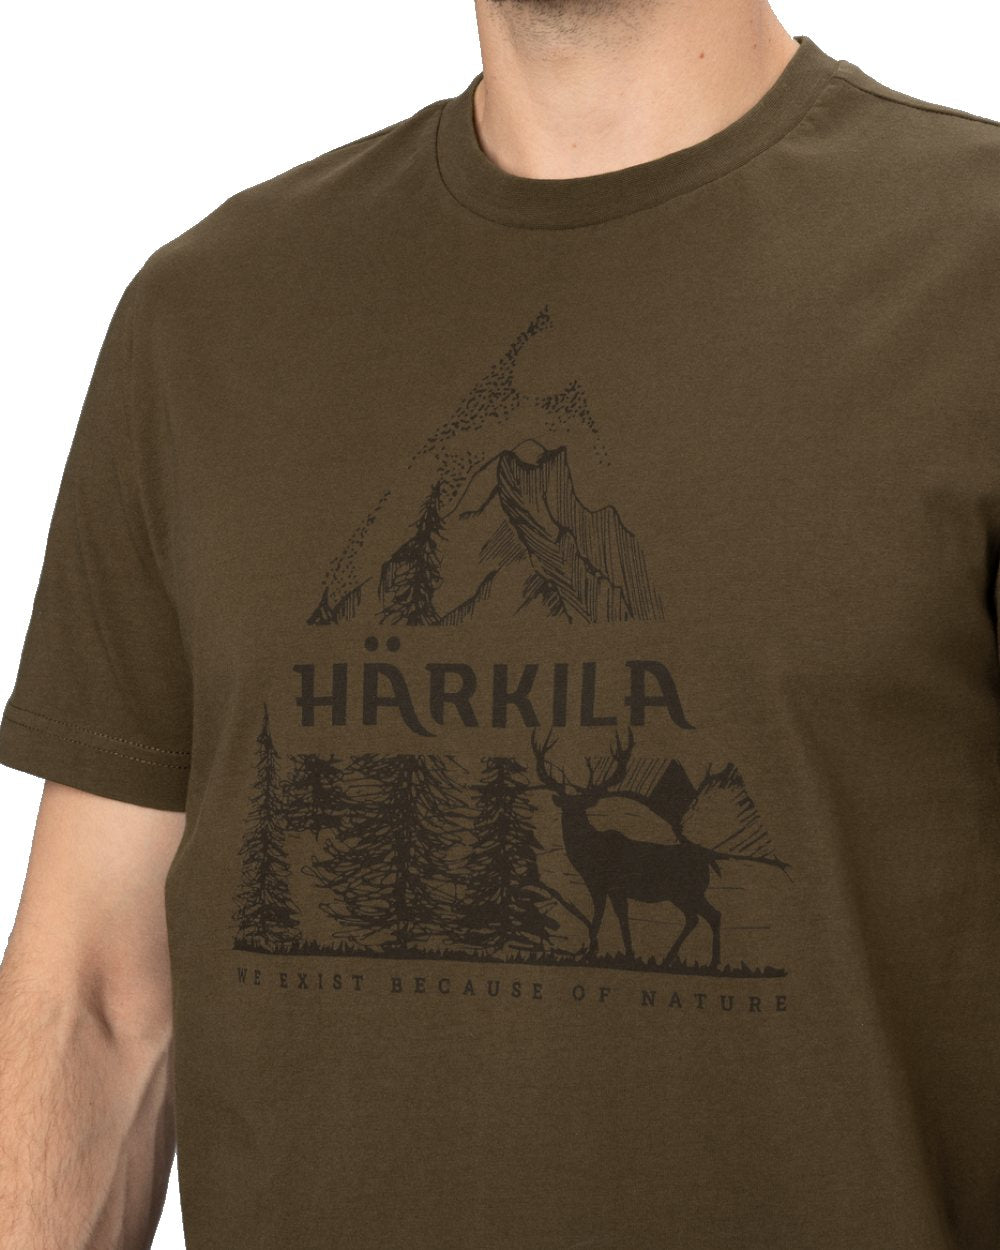 Willow Green coloured Harkila Nature Short Sleeve T-Shirt on white background